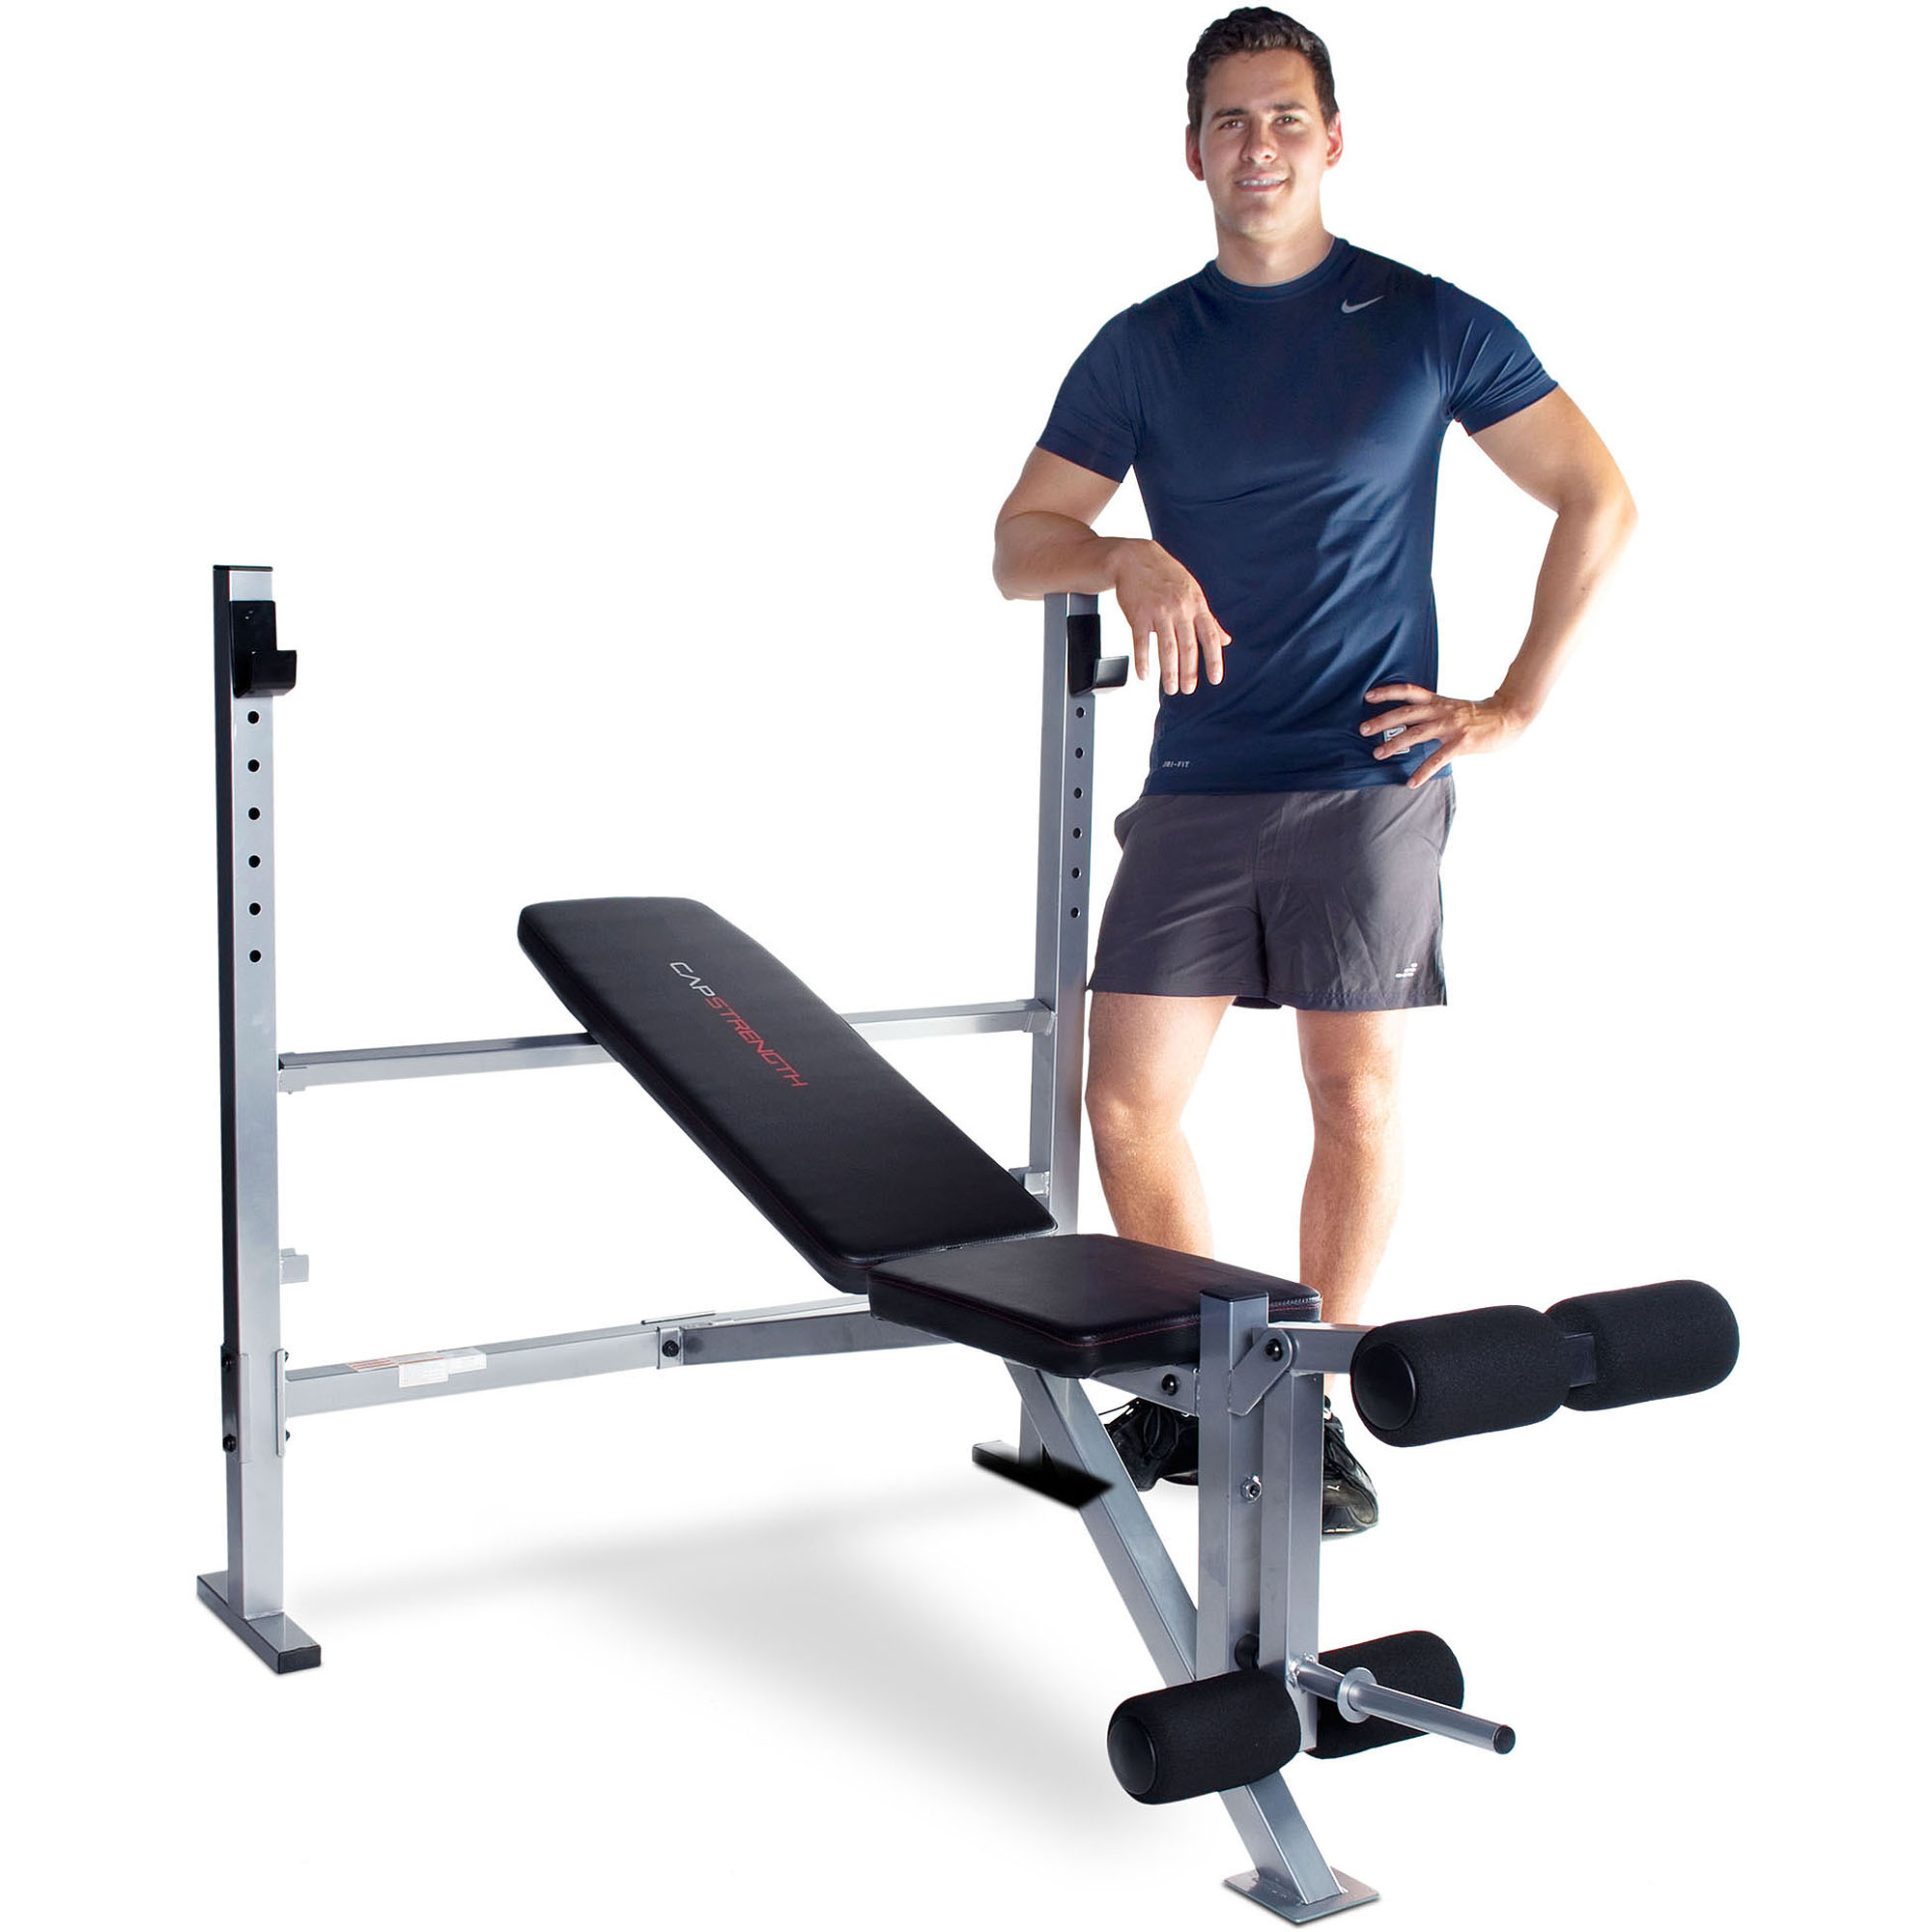 CAP Strength Deluxe Mid-Width Weight Bench with Leg Attachment (500lb Capacity), Black and Gray - image 4 of 5